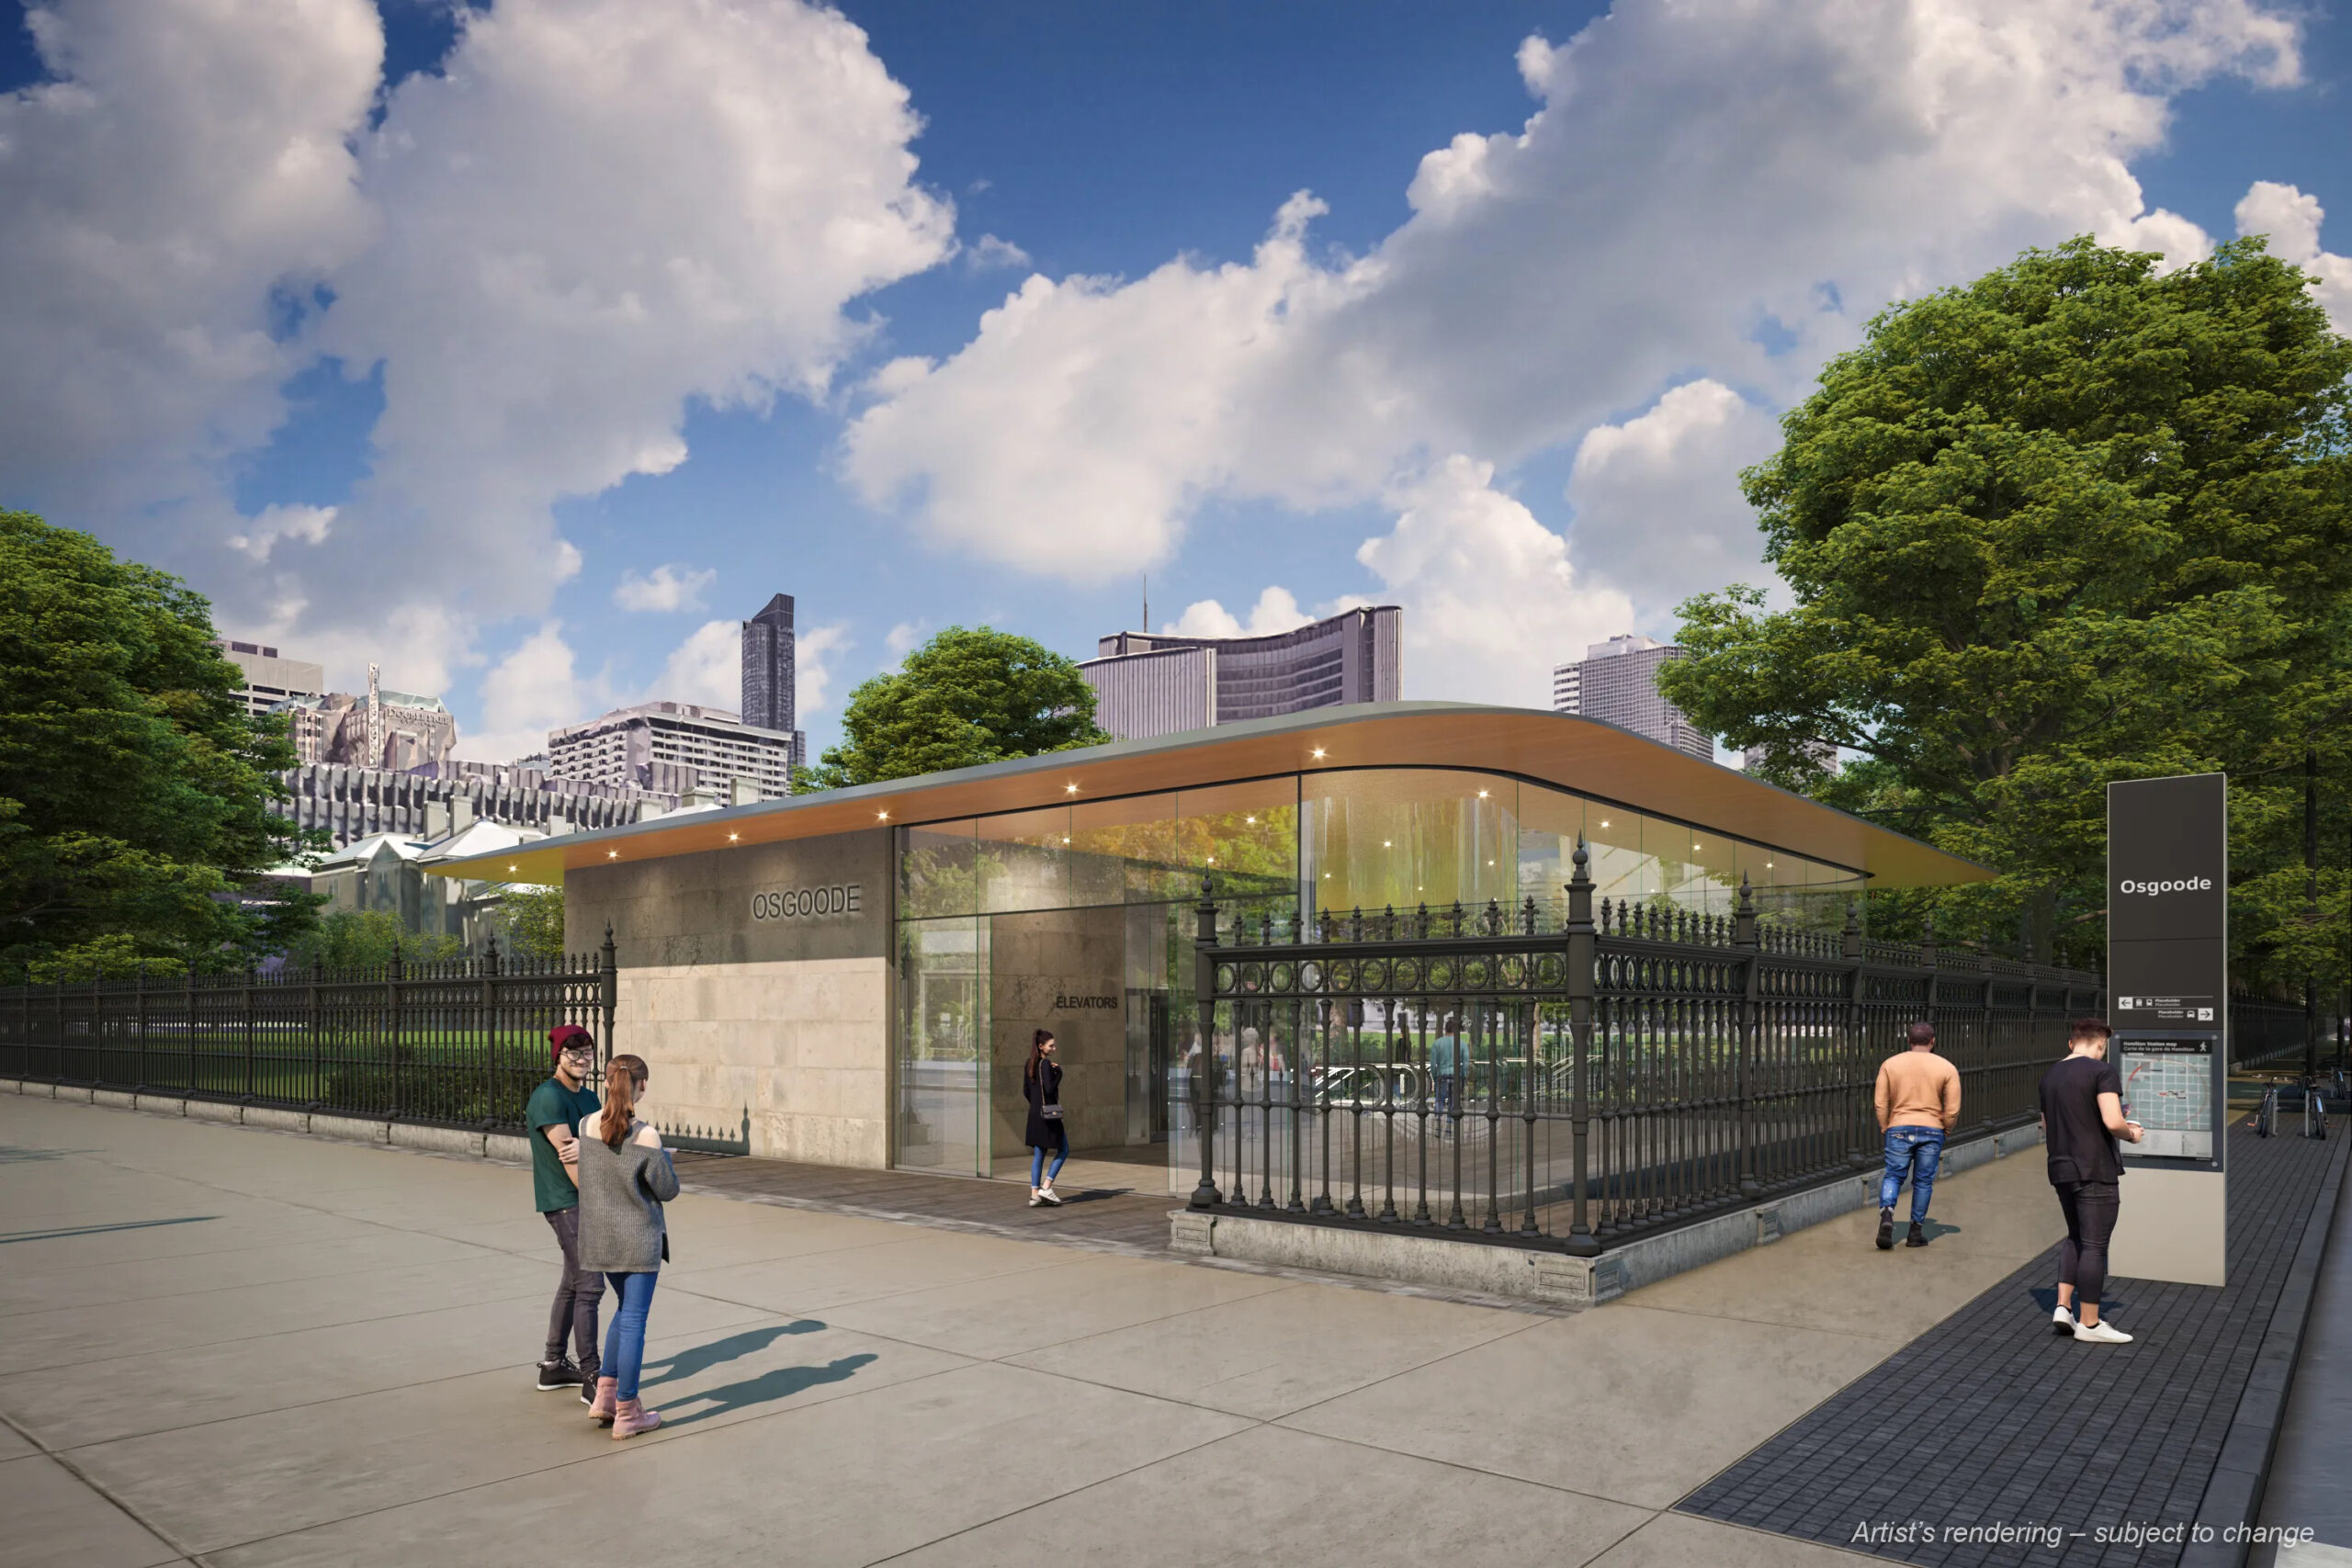 Artist rendering of the Ontario Line subway stop at Osgoode Hall. Courtesy of Metrolinx